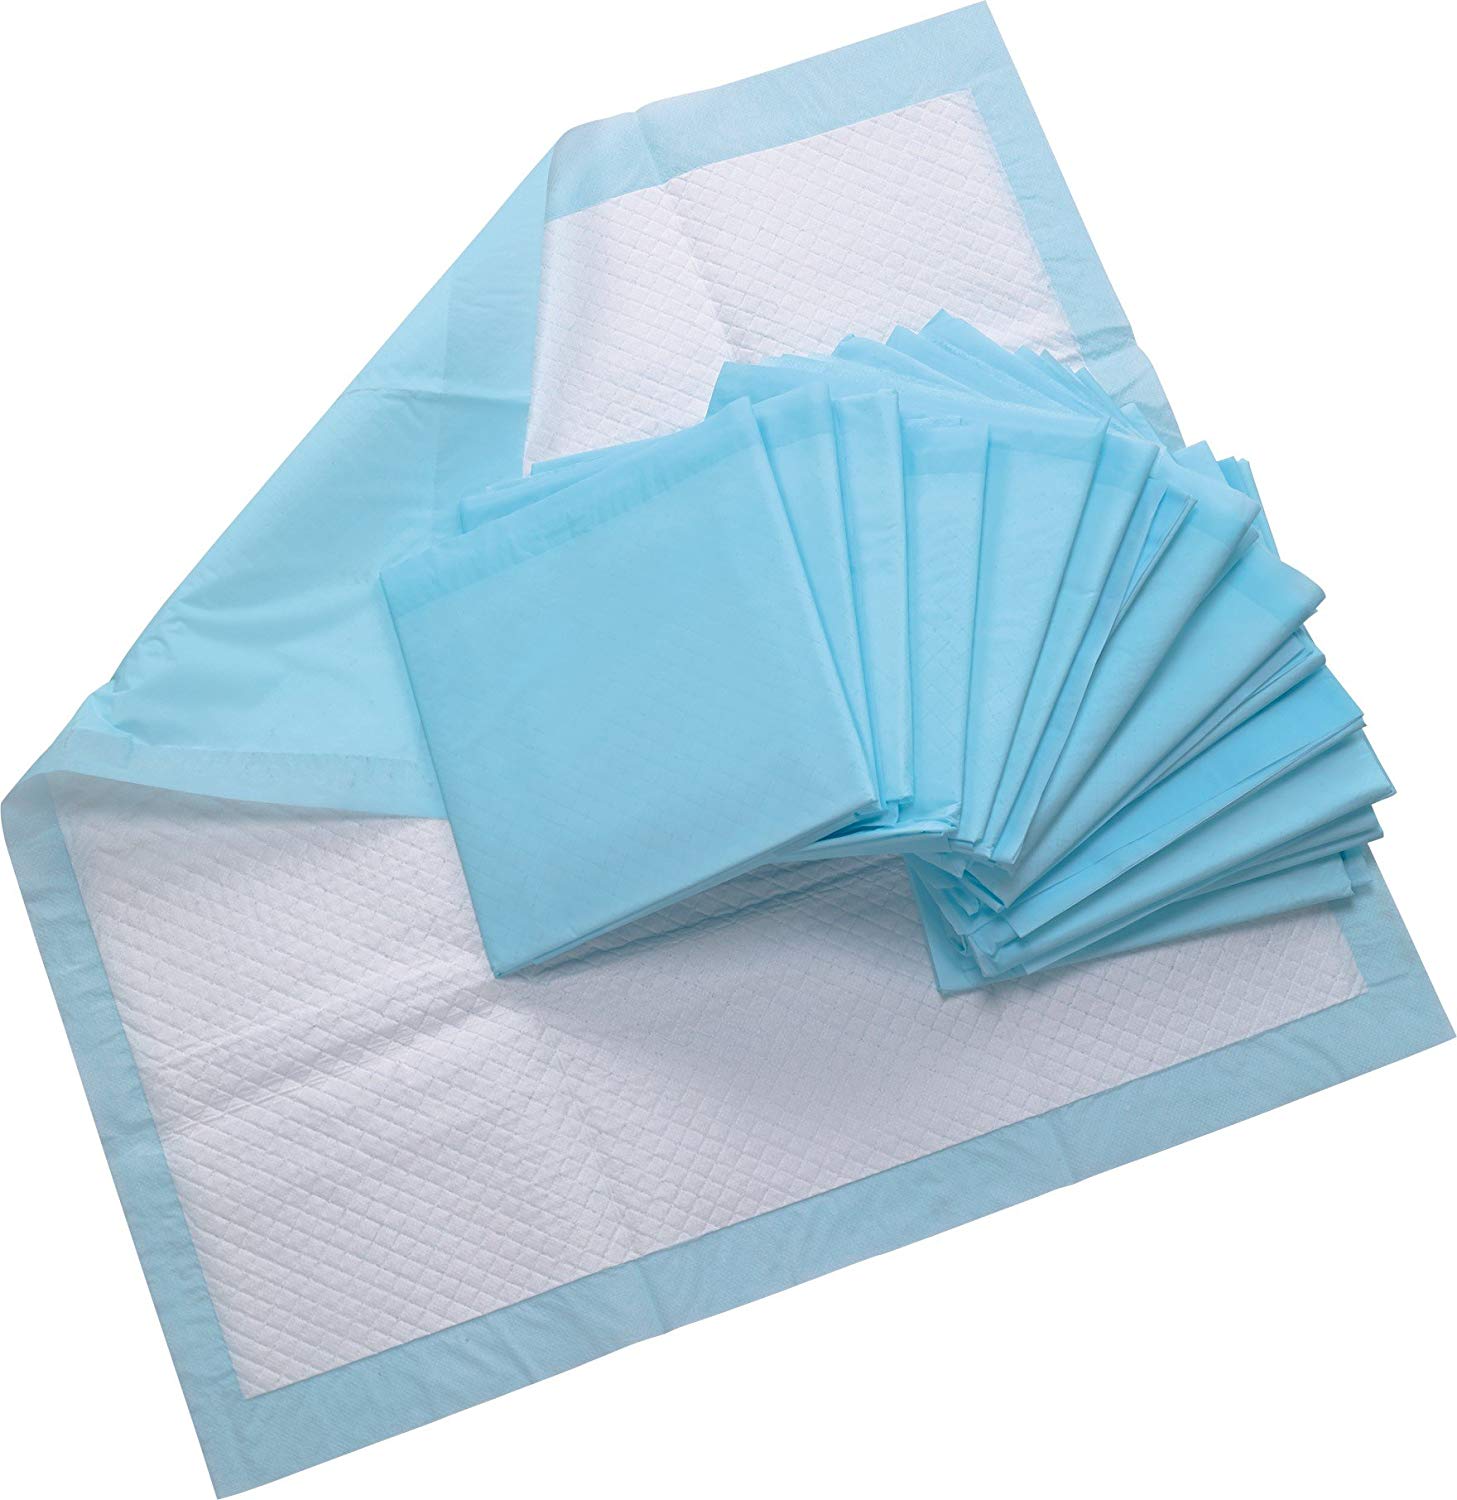 Healthline Blue Medical Chucks Pads, Chux Disposable Underpads 23x36,  Waterproof Mattress Protector Incontinence Absorbent Bed Pads for Adults,  Elderly, Children, Pets, Large Size, Count (150/Pack) 